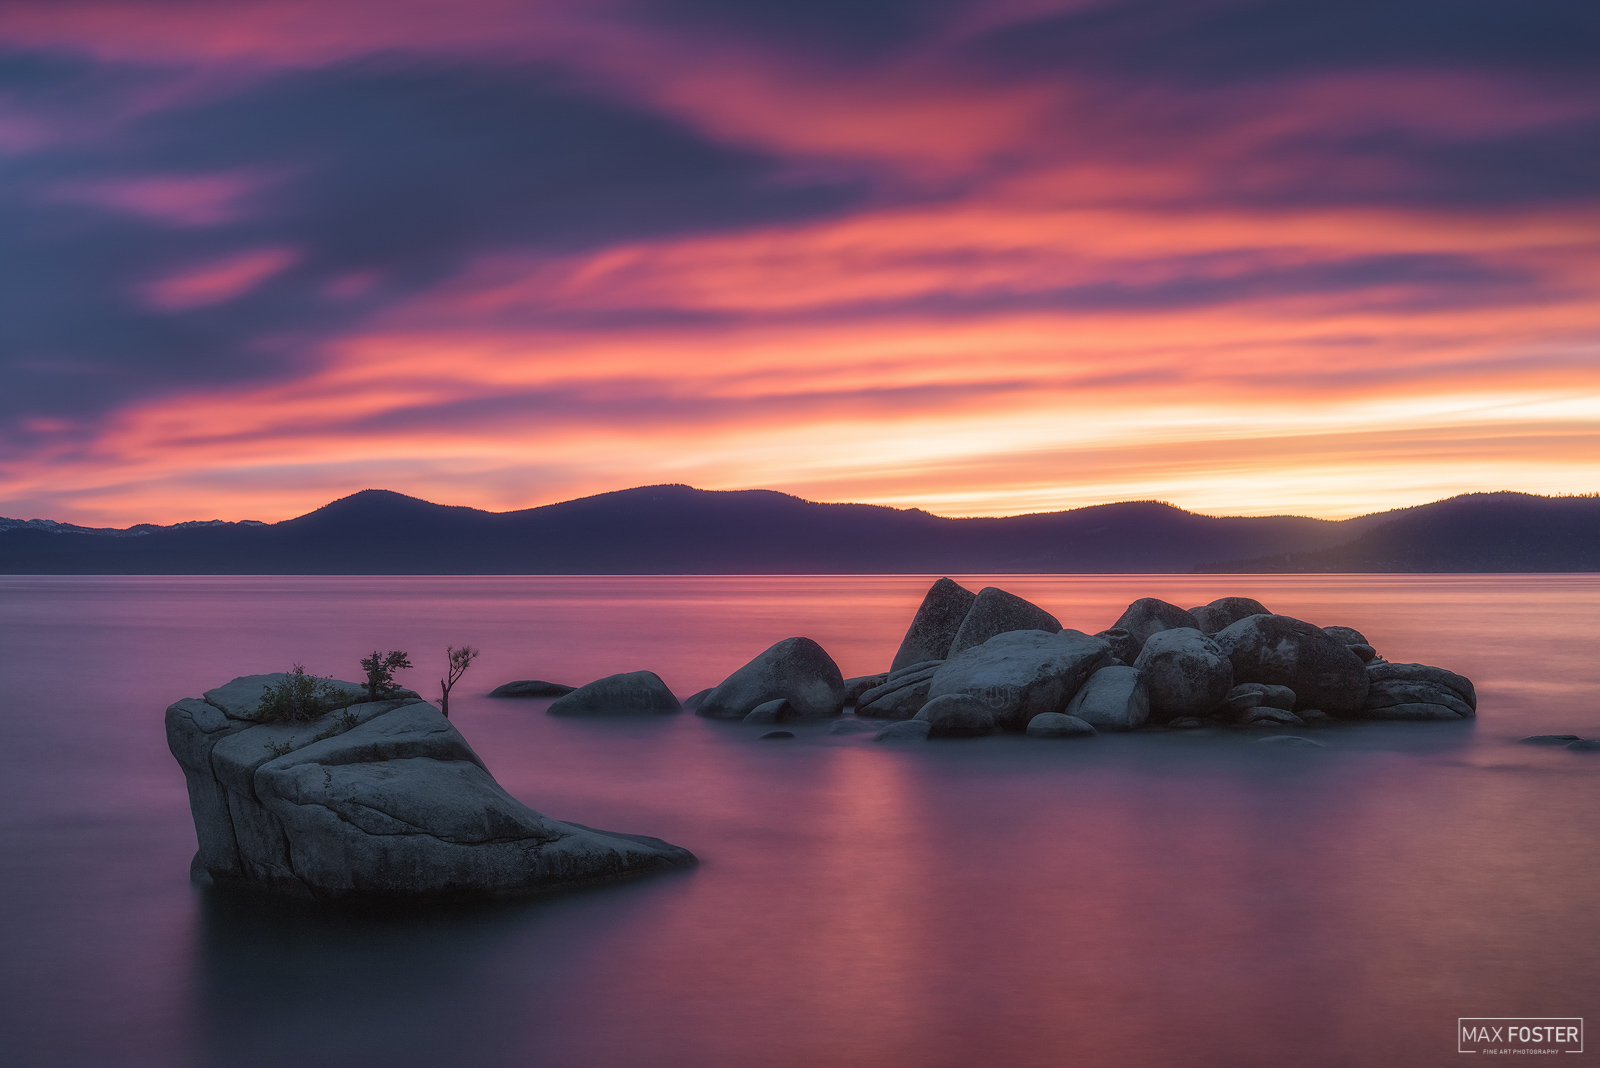 Elevate your space with Pretty In Pink, Max Foster's limited edition photography print of Lake Tahoe, Nevada from his Water gallery...